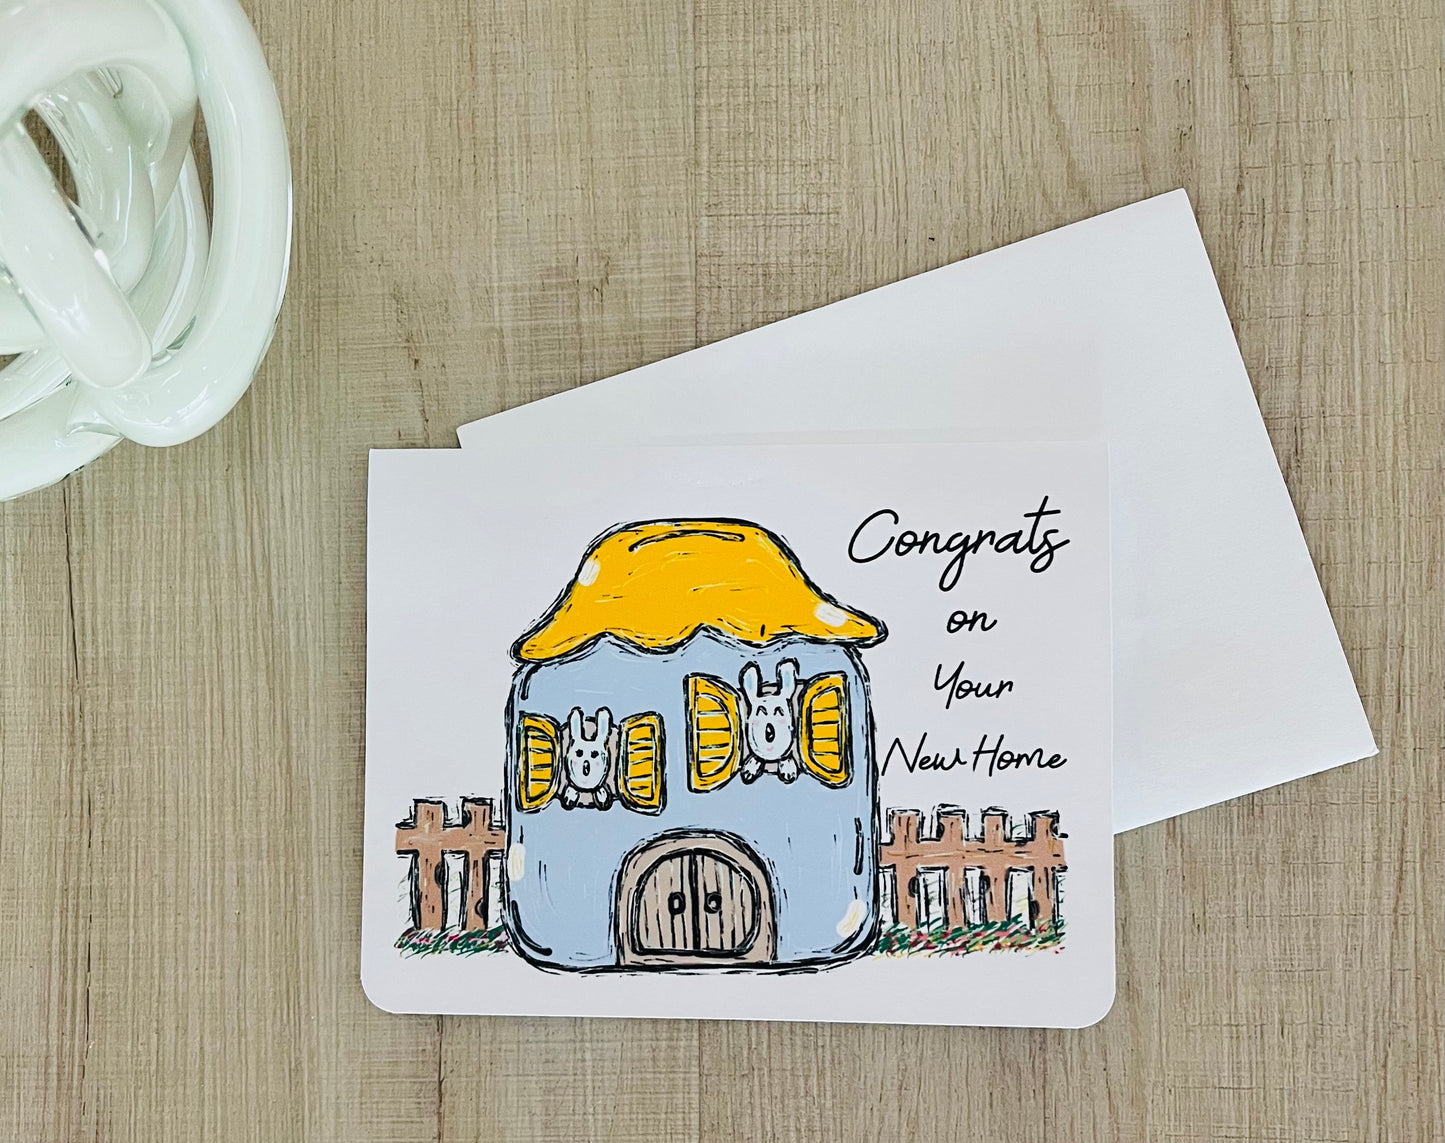 Congrats on Your New Home Handmade Greeting Card